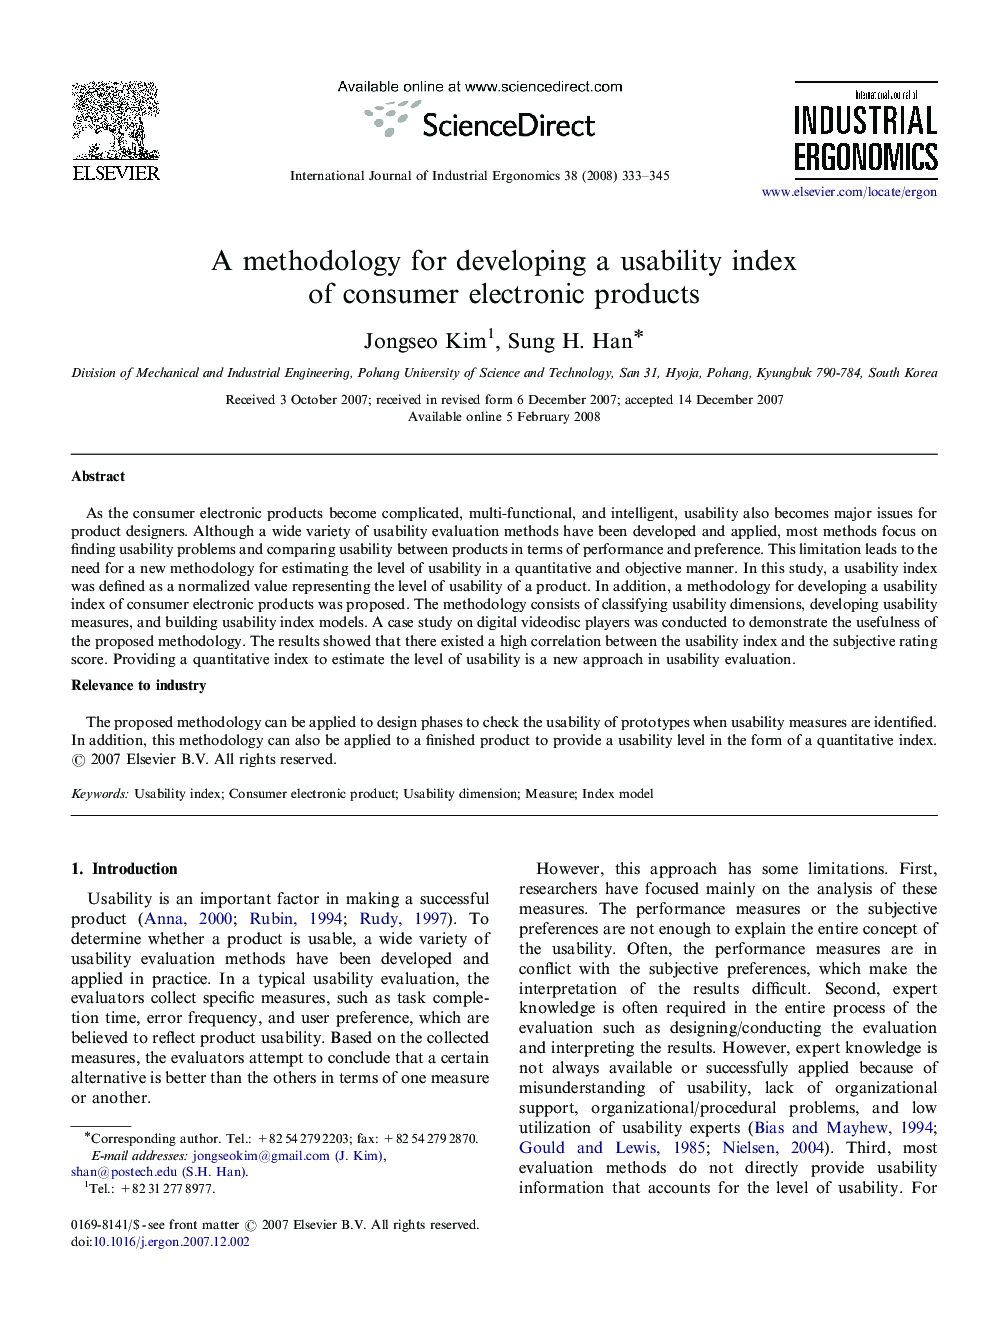 A methodology for developing a usability index of consumer electronic products